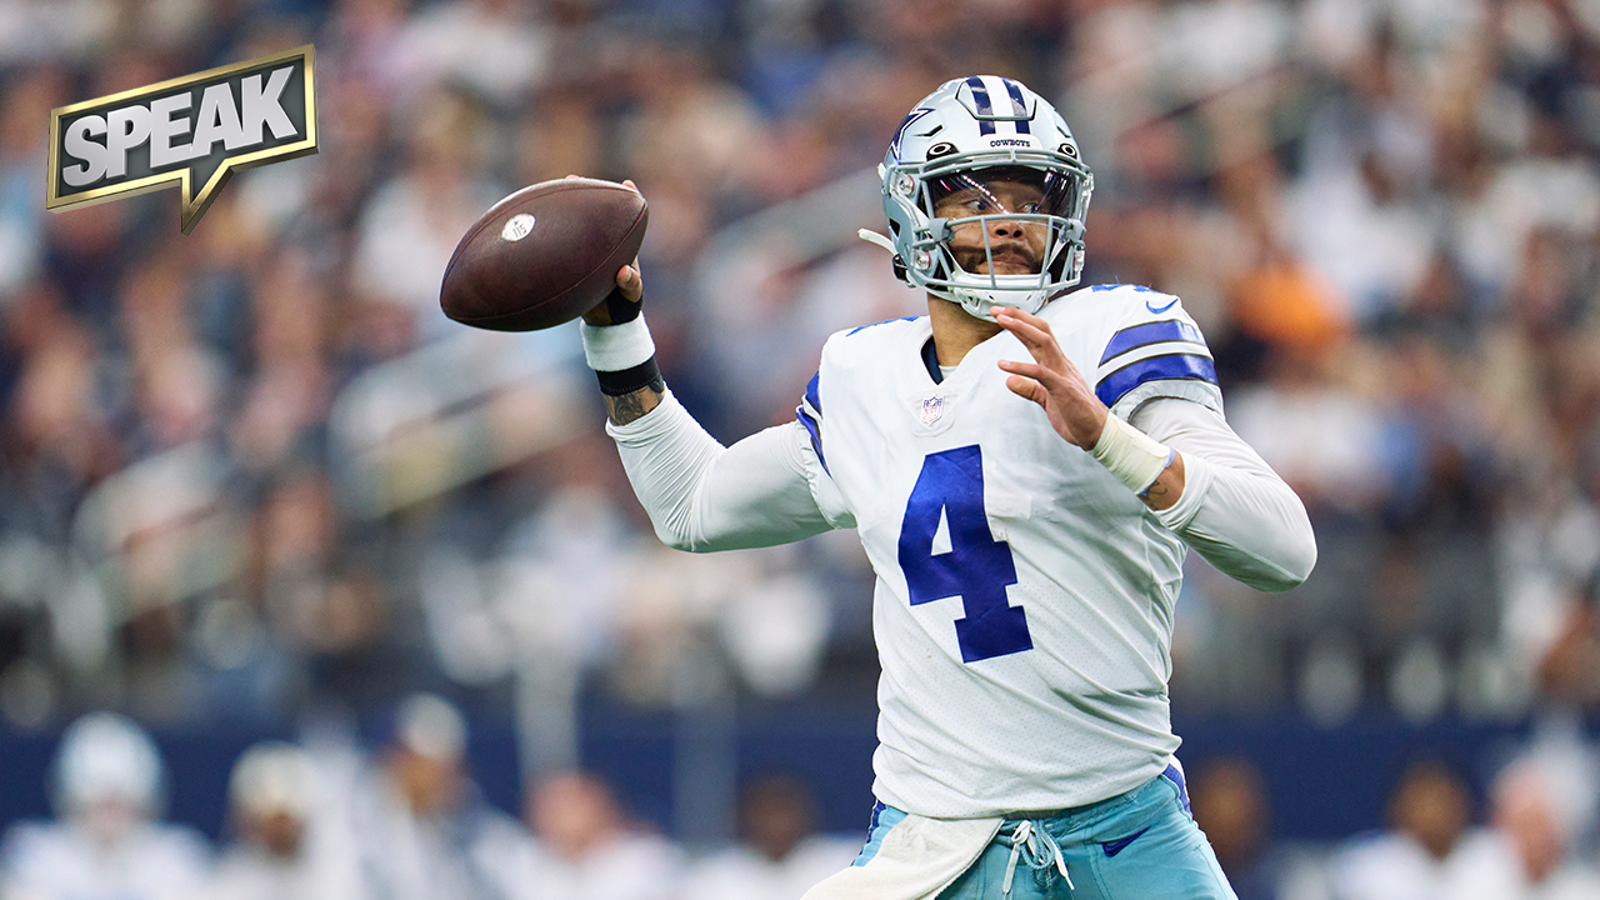 Are you impressed with Dak Prescott's return to the Cowboys lineup?  |  SPEAK